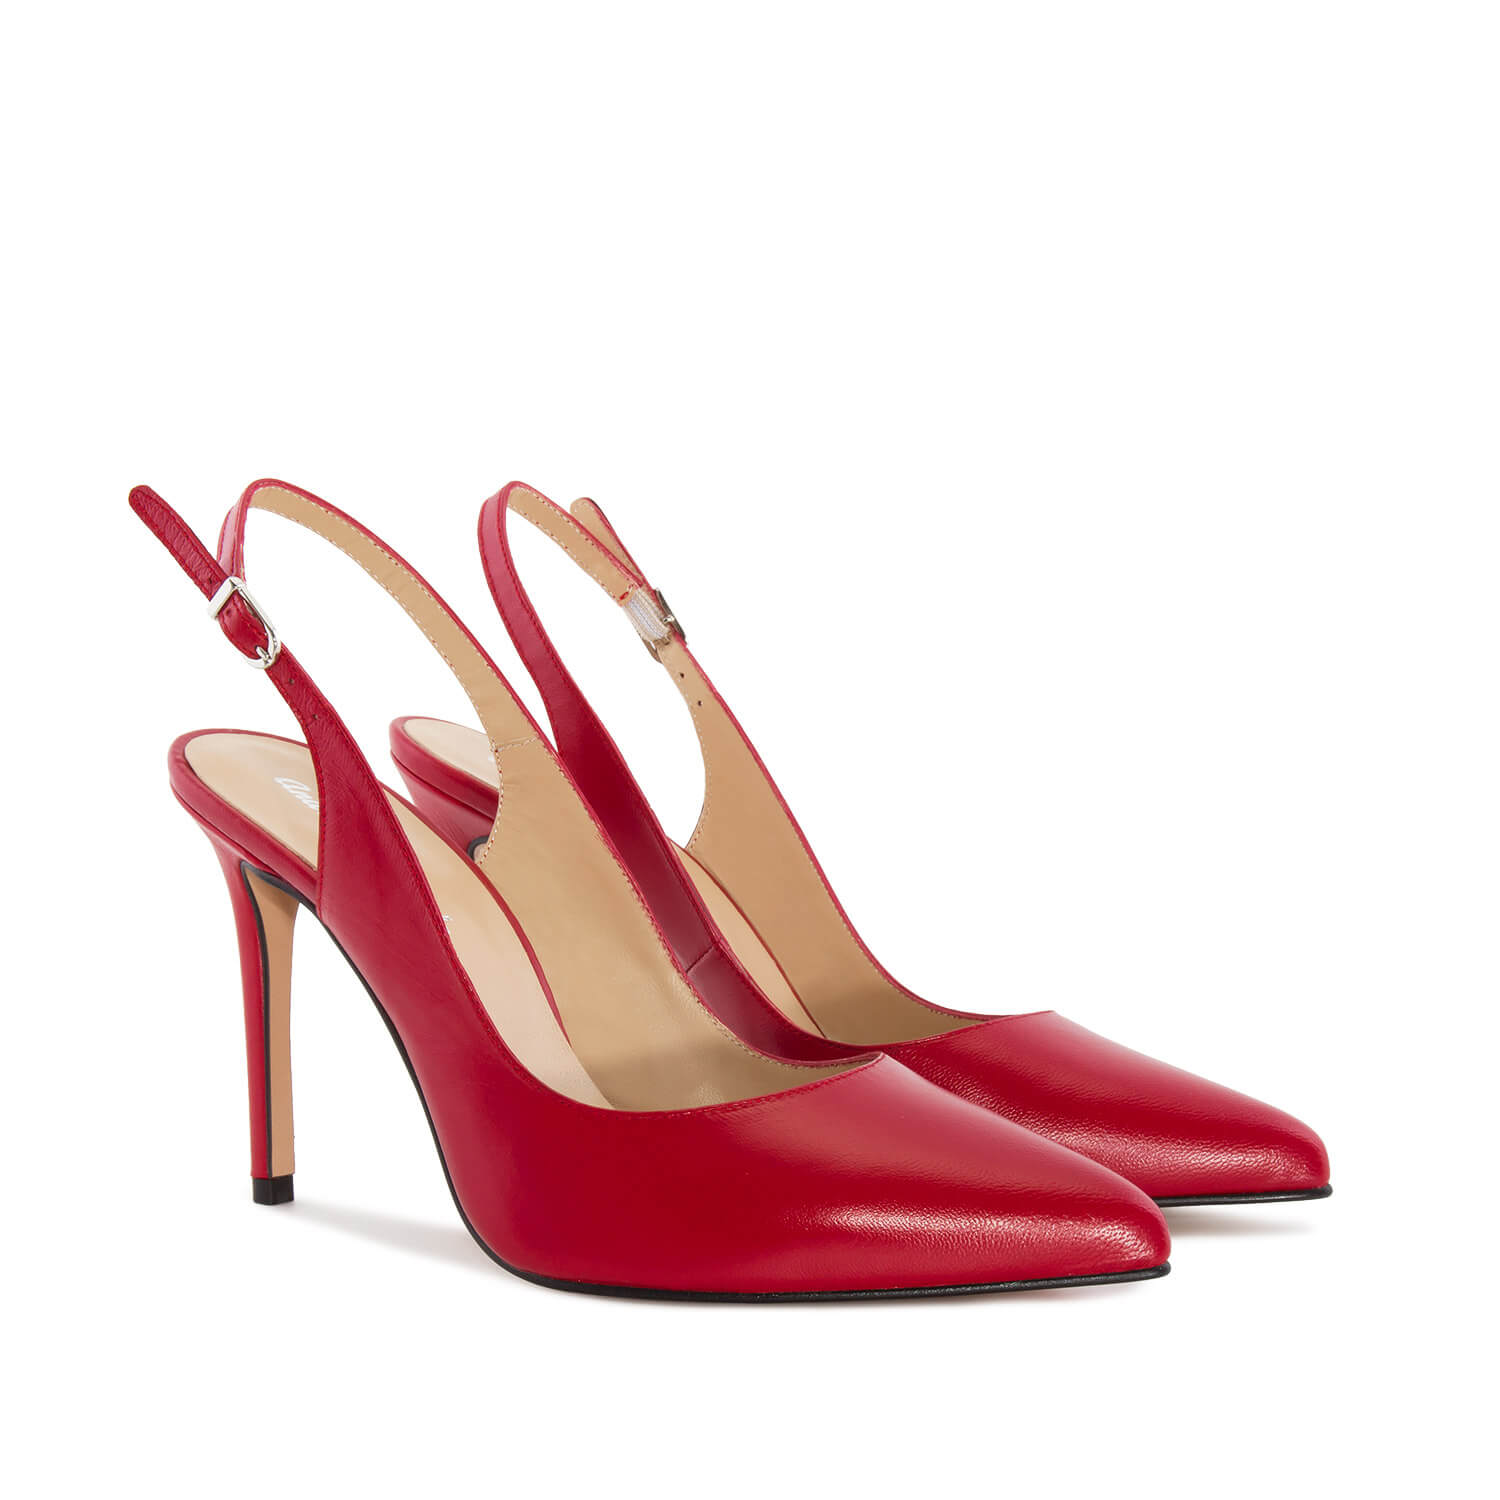 Fine Toe Slingback Shoes in Red Leather 